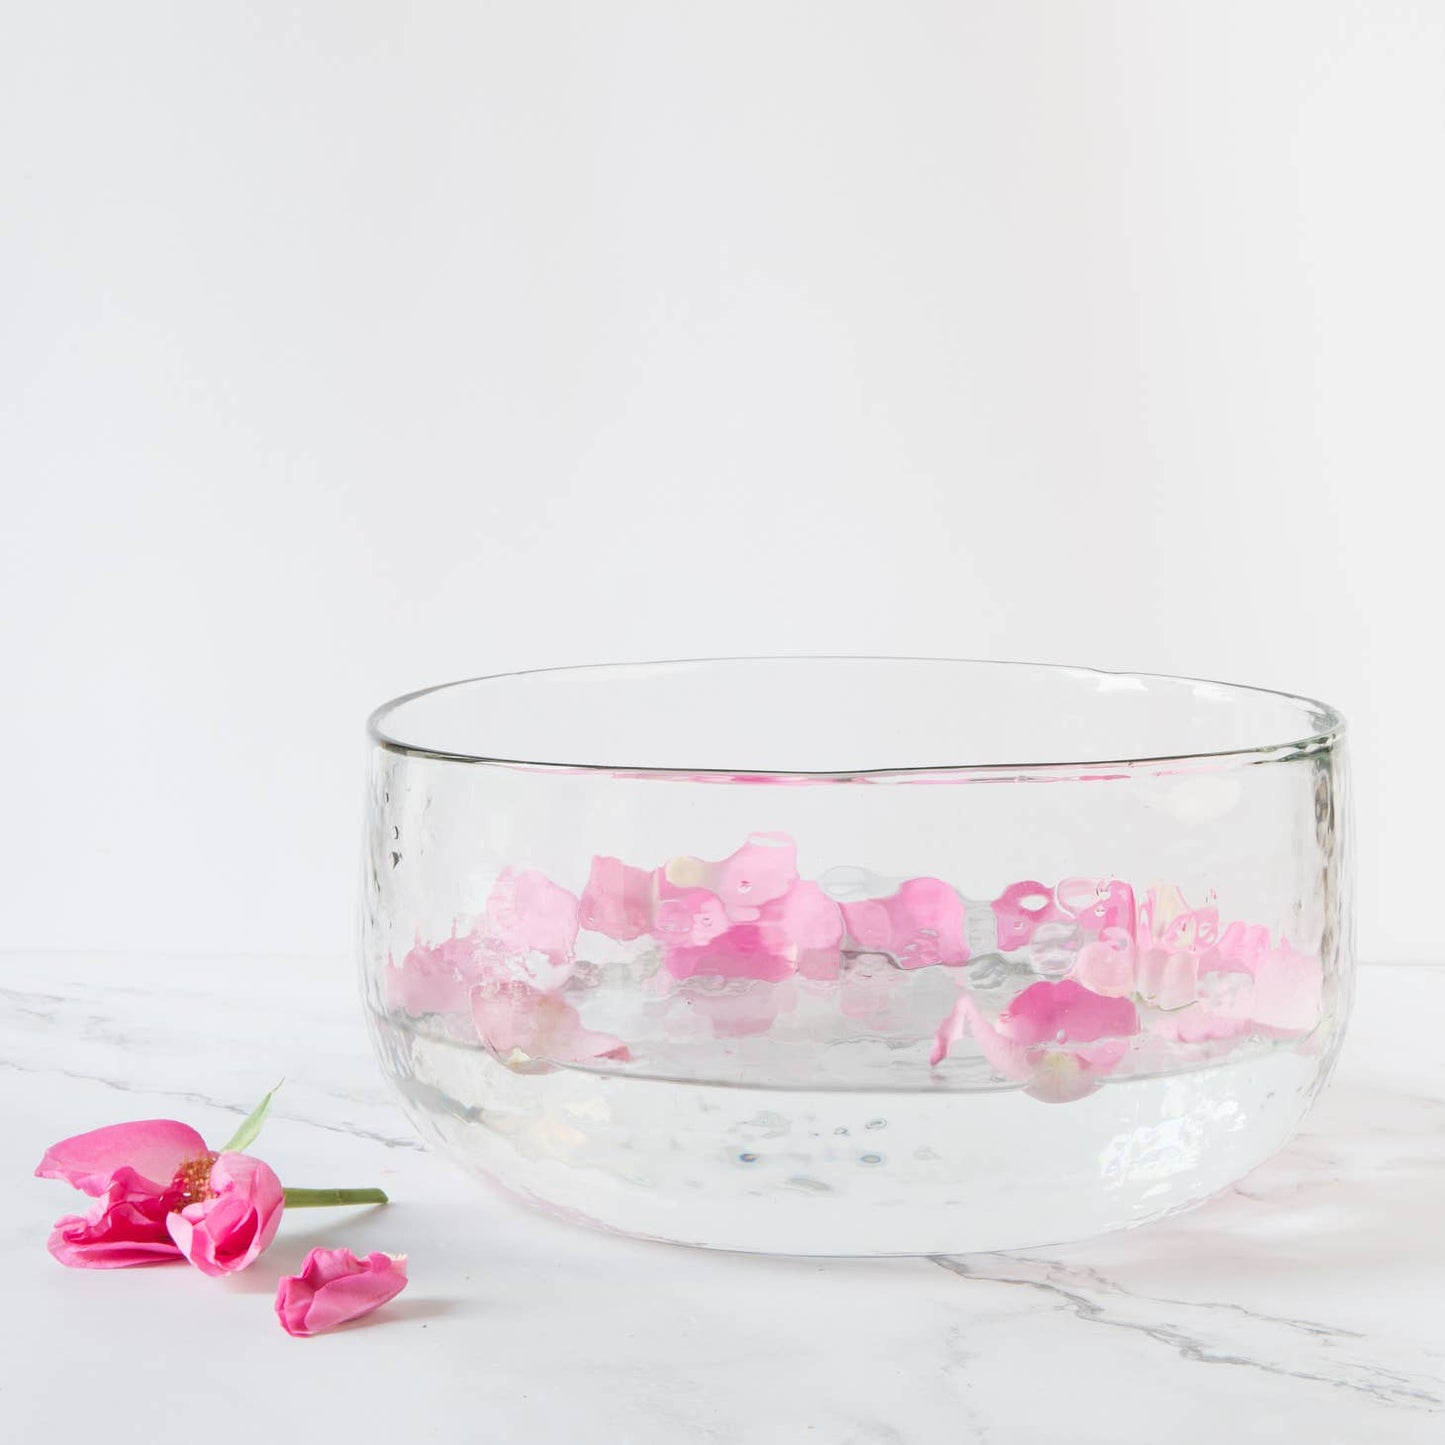 Made of thick, clear glass, this textured bowl looks lovely whether it contains fruit, salad, floating blossoms, a colorful side dish, or nothing at all. With so many possible uses, this one won't stay in the cupboard for long. Ethically made in India.